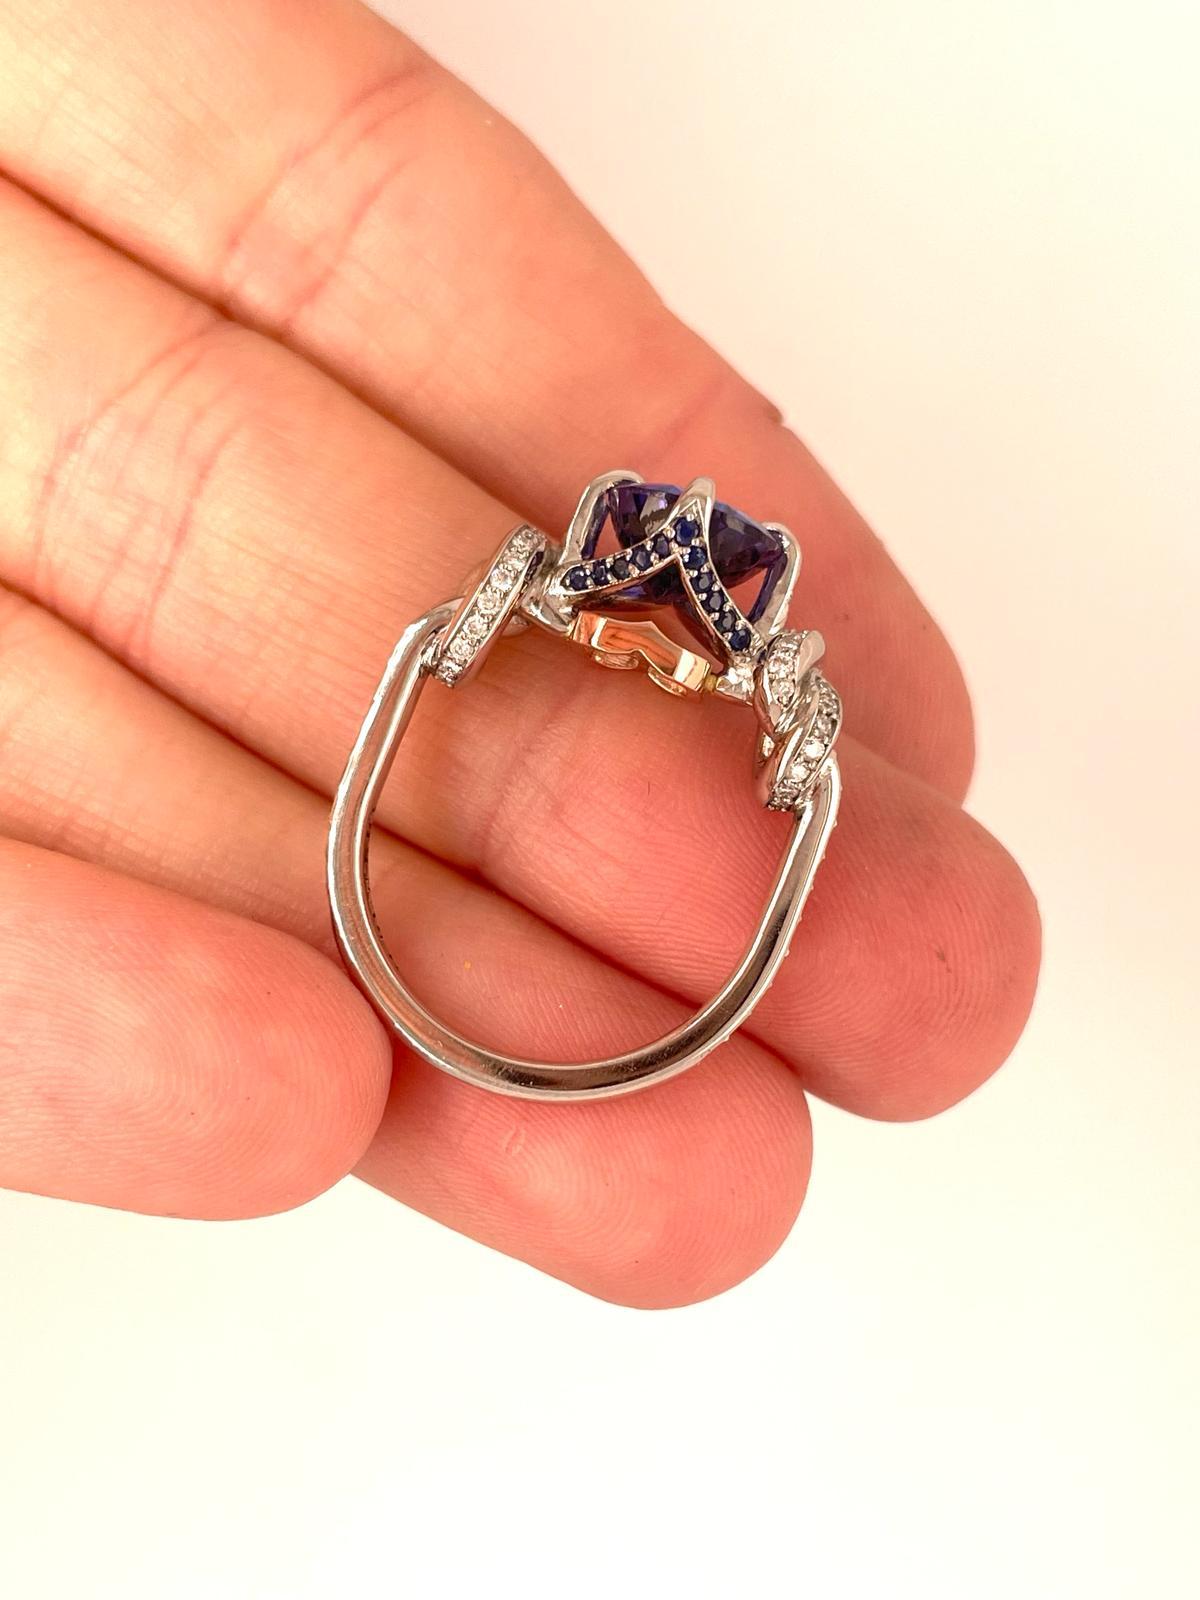 For Sale:  2ct tanzanite and diamond ring in platinum and rose gold  Forget me knot ring  17